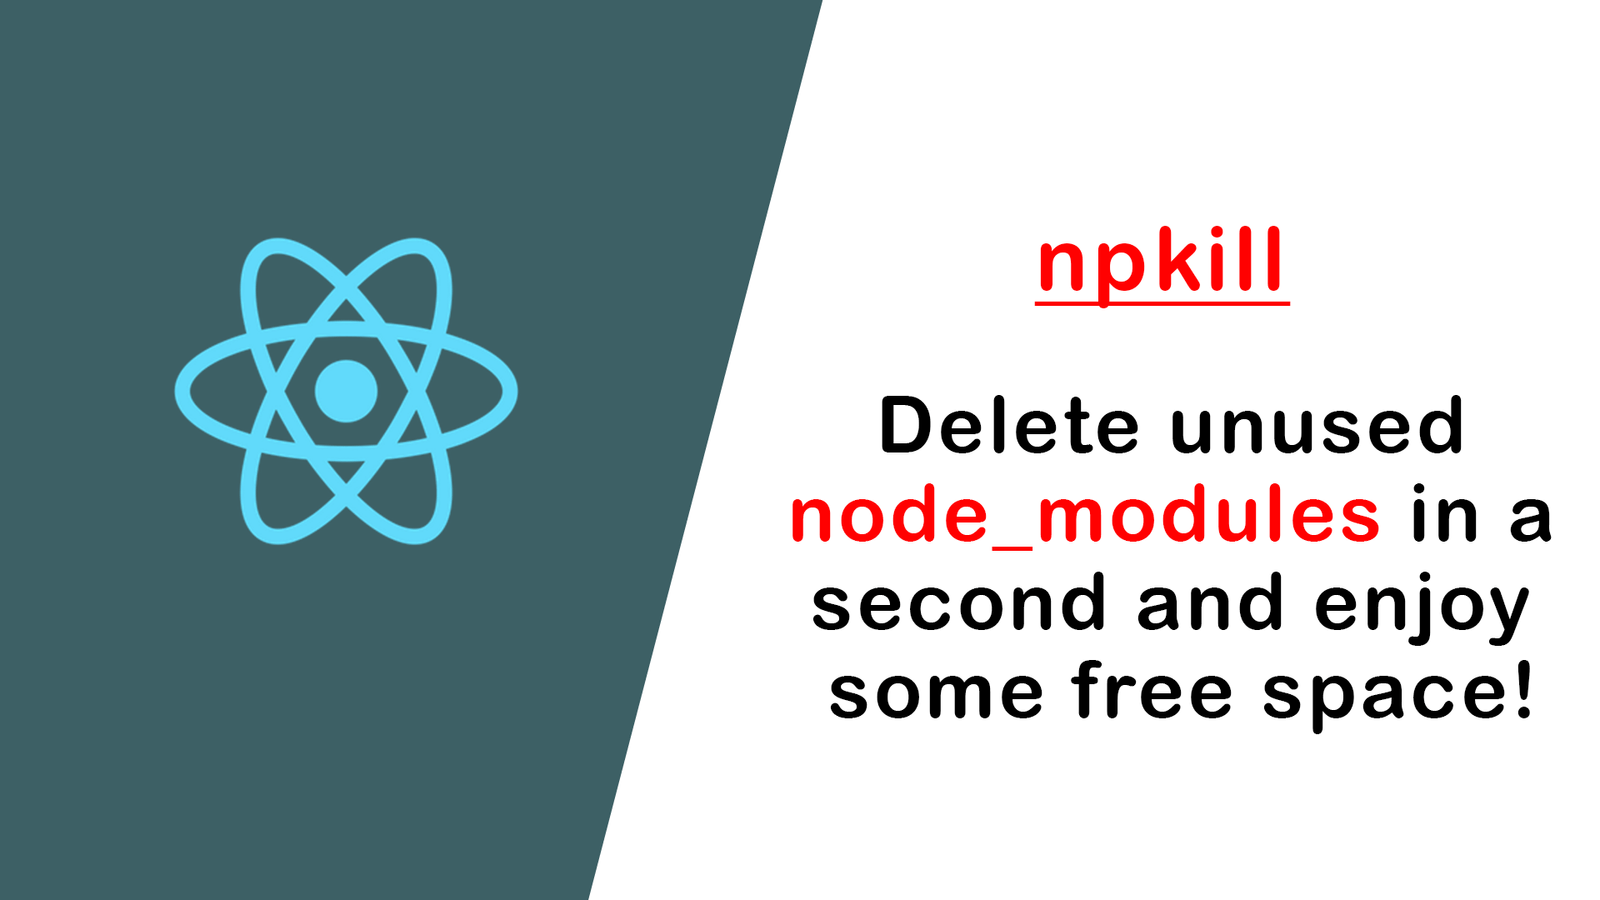 Delete unused node_modules in a second and enjoy some free space!